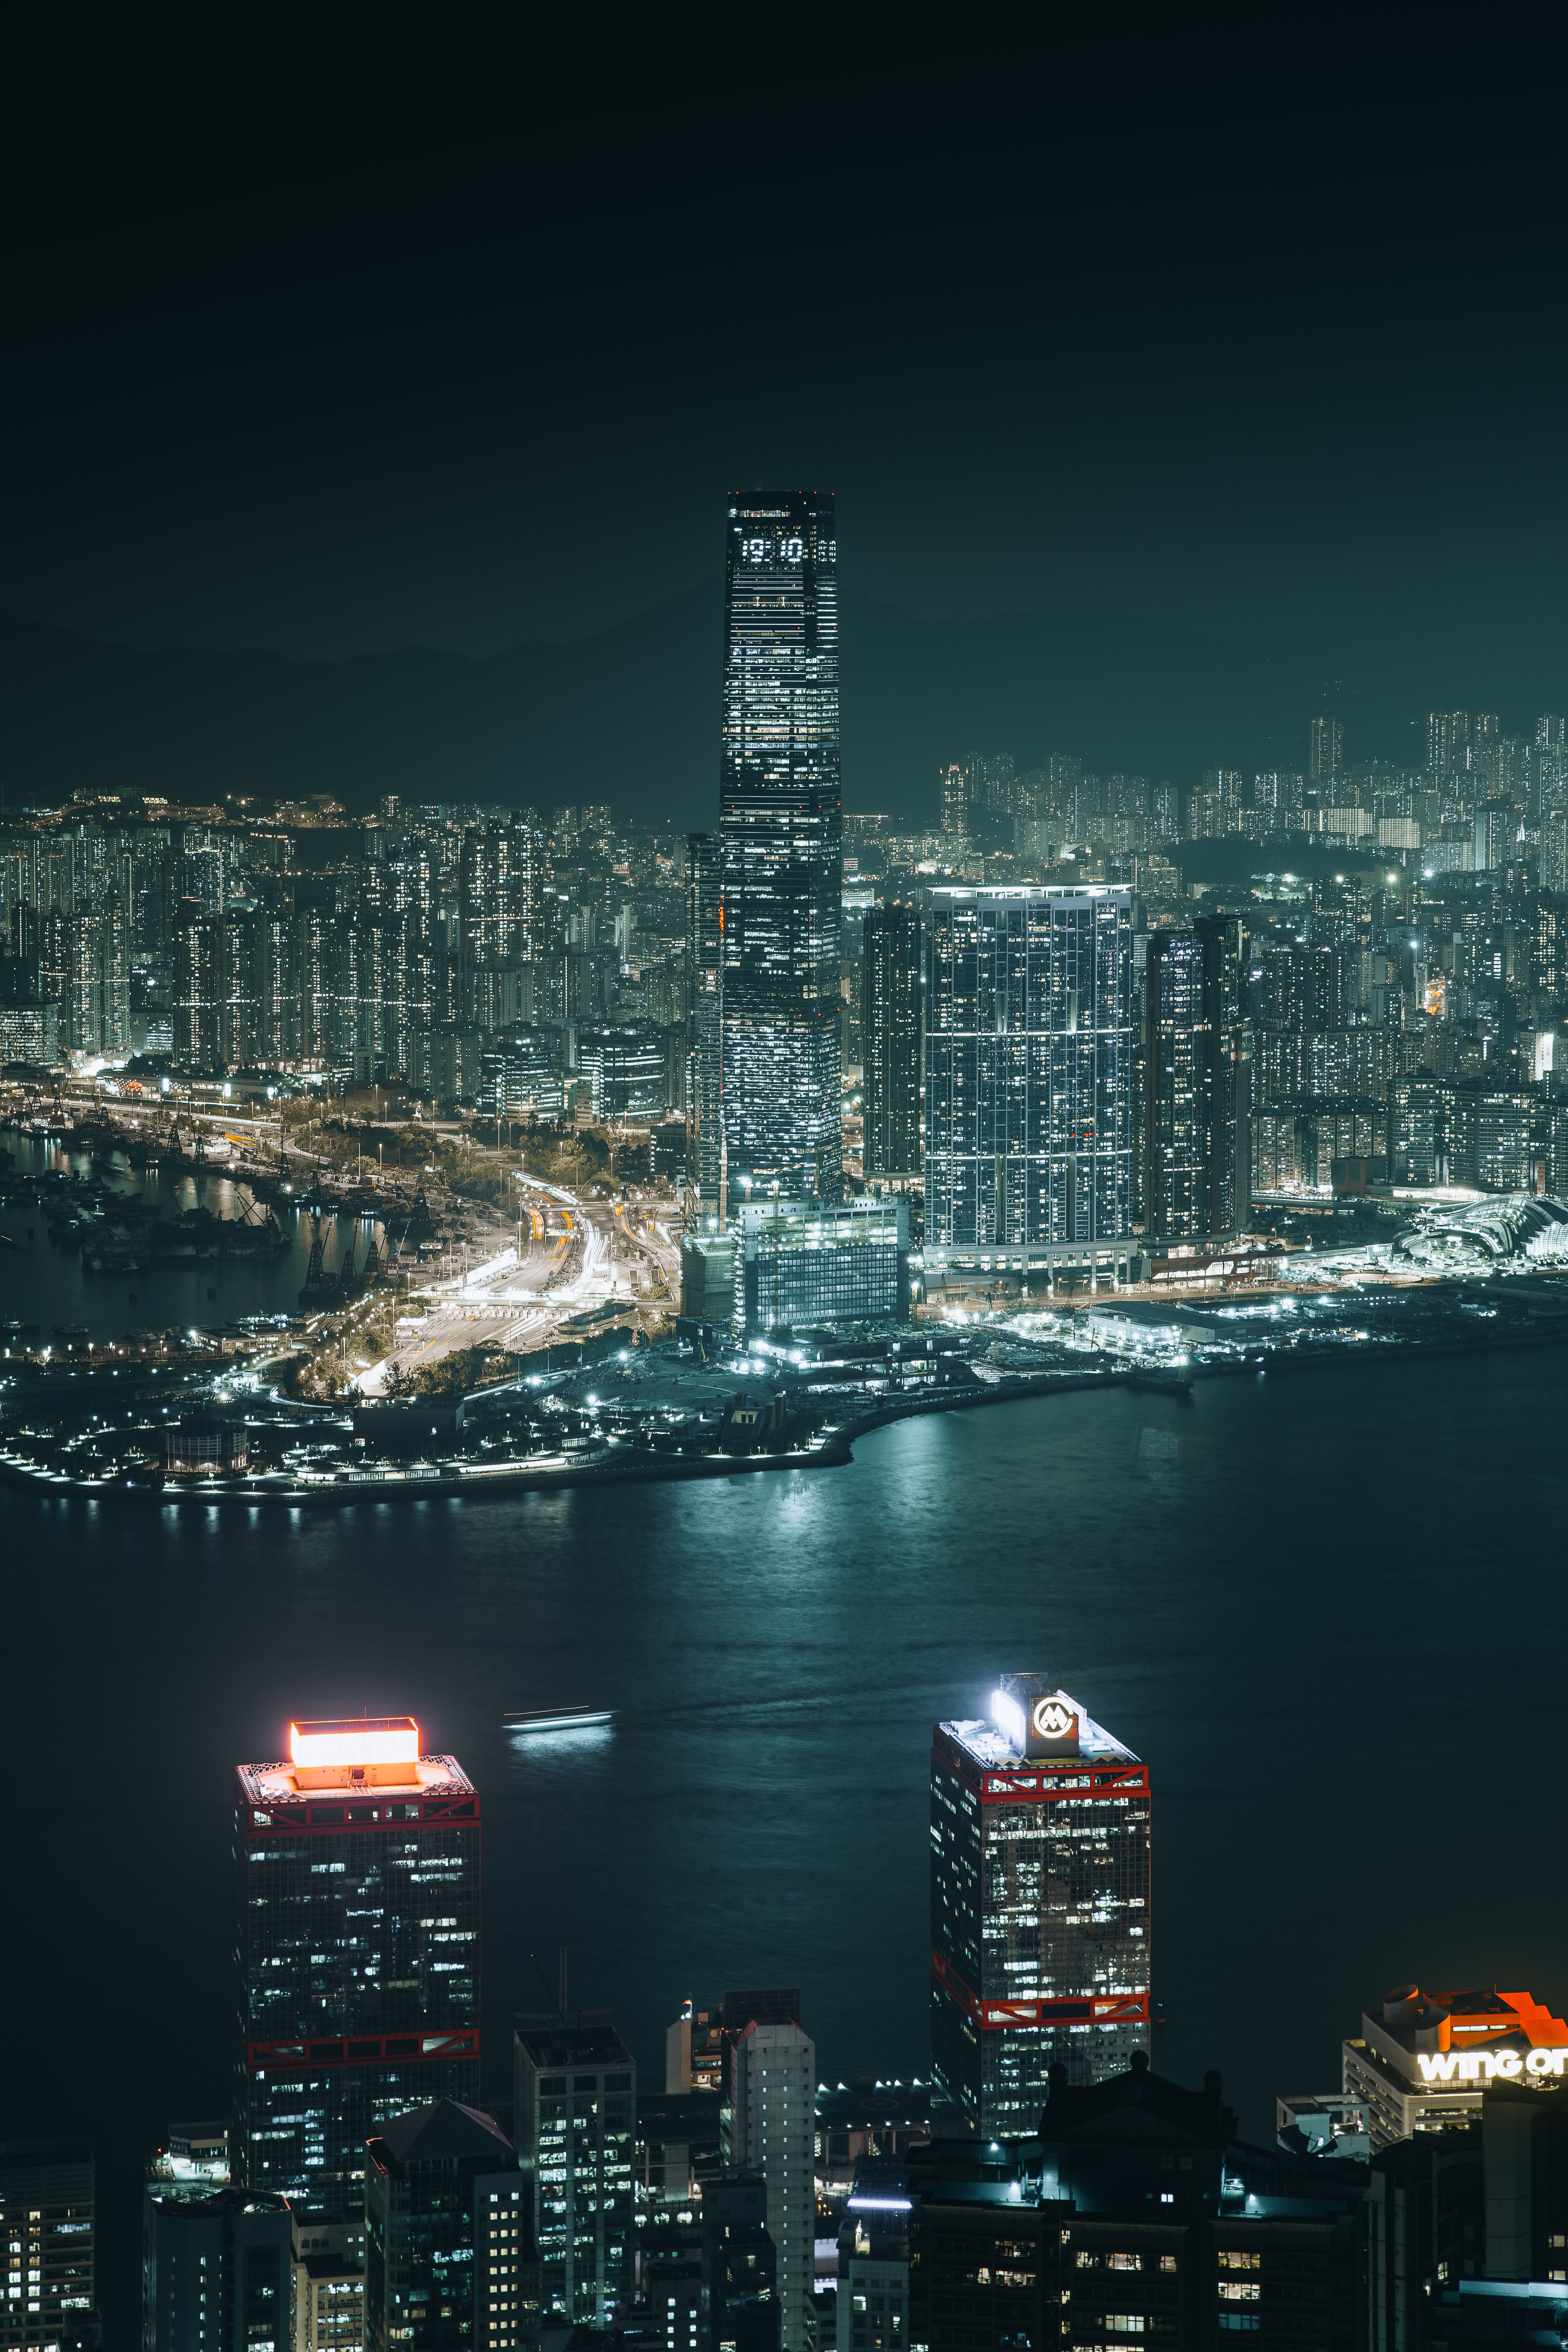 hong kong s a r, building, hong kong, cities, rivers, view from above, night city cellphone